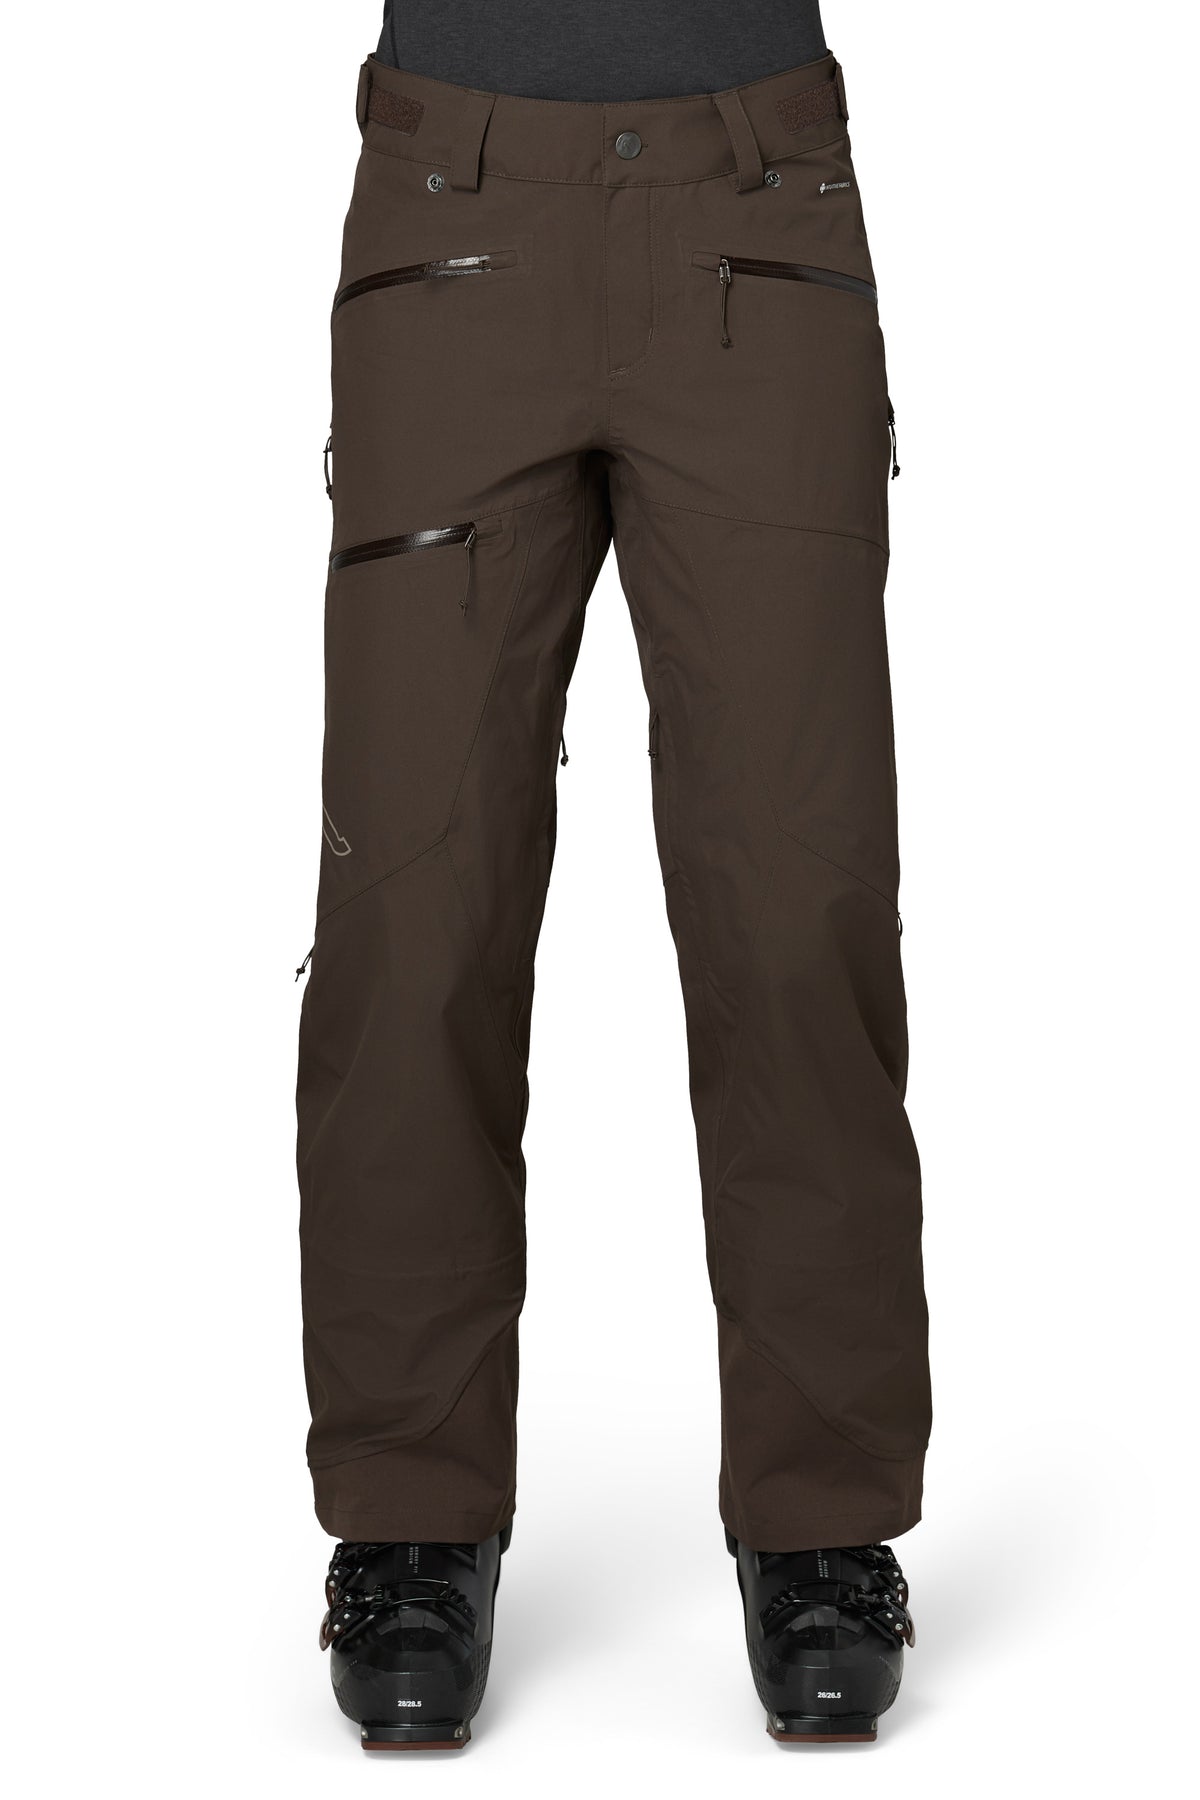 Shop Womens Cargo Pants Online - Fast Shipping & Easy Returns